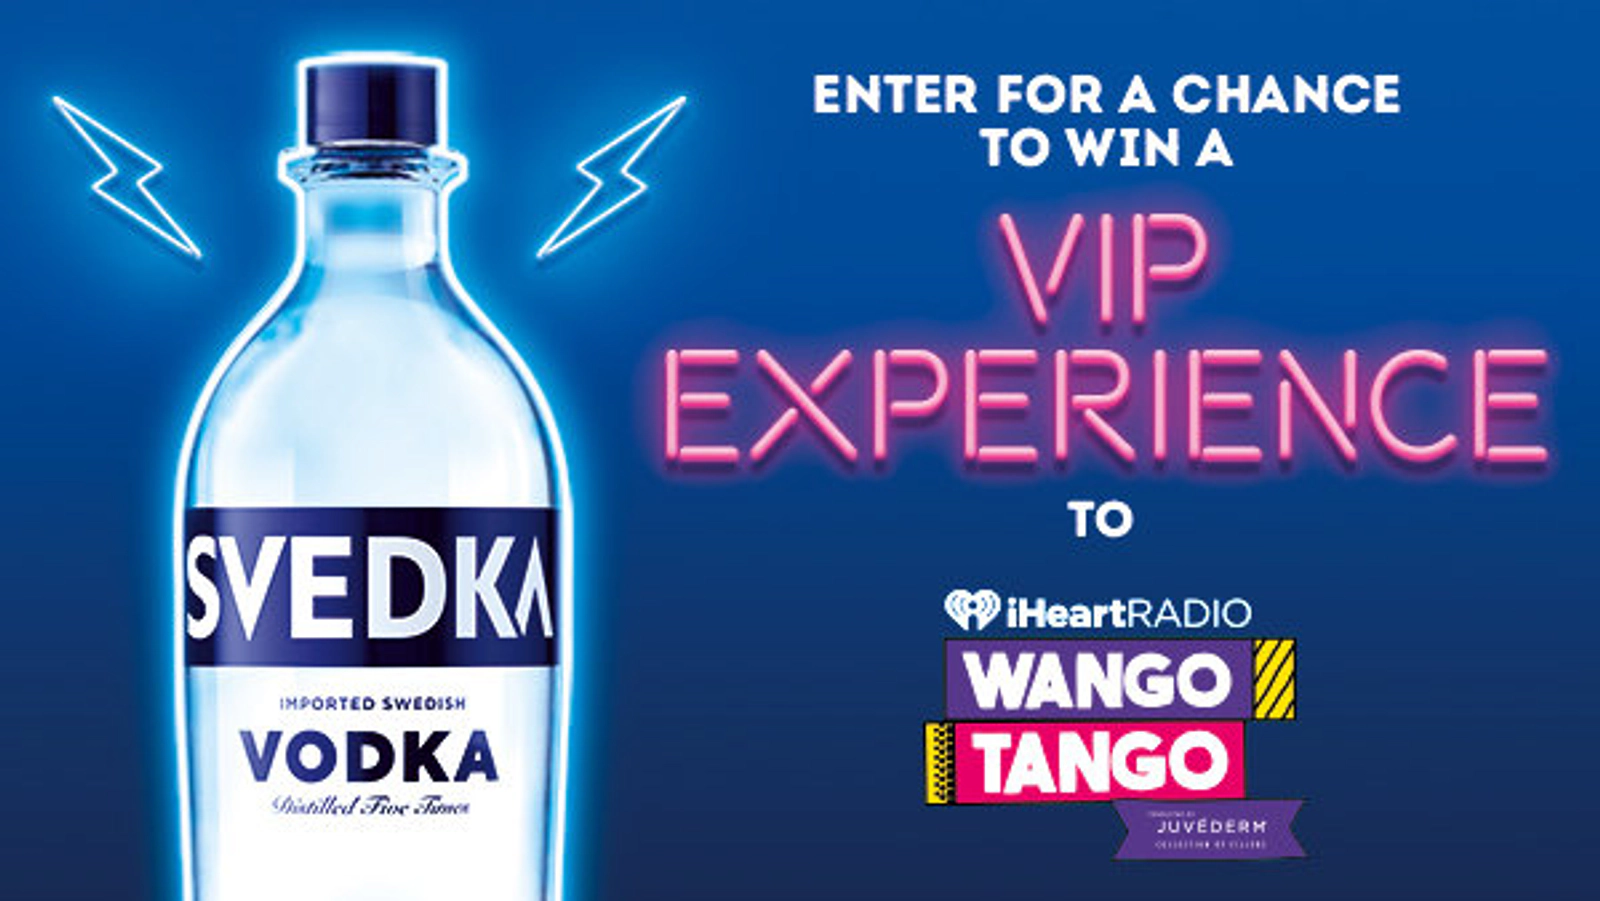 Enter For A Chance To Win A VIP Experience To Wango Tango! - Thumbnail Image